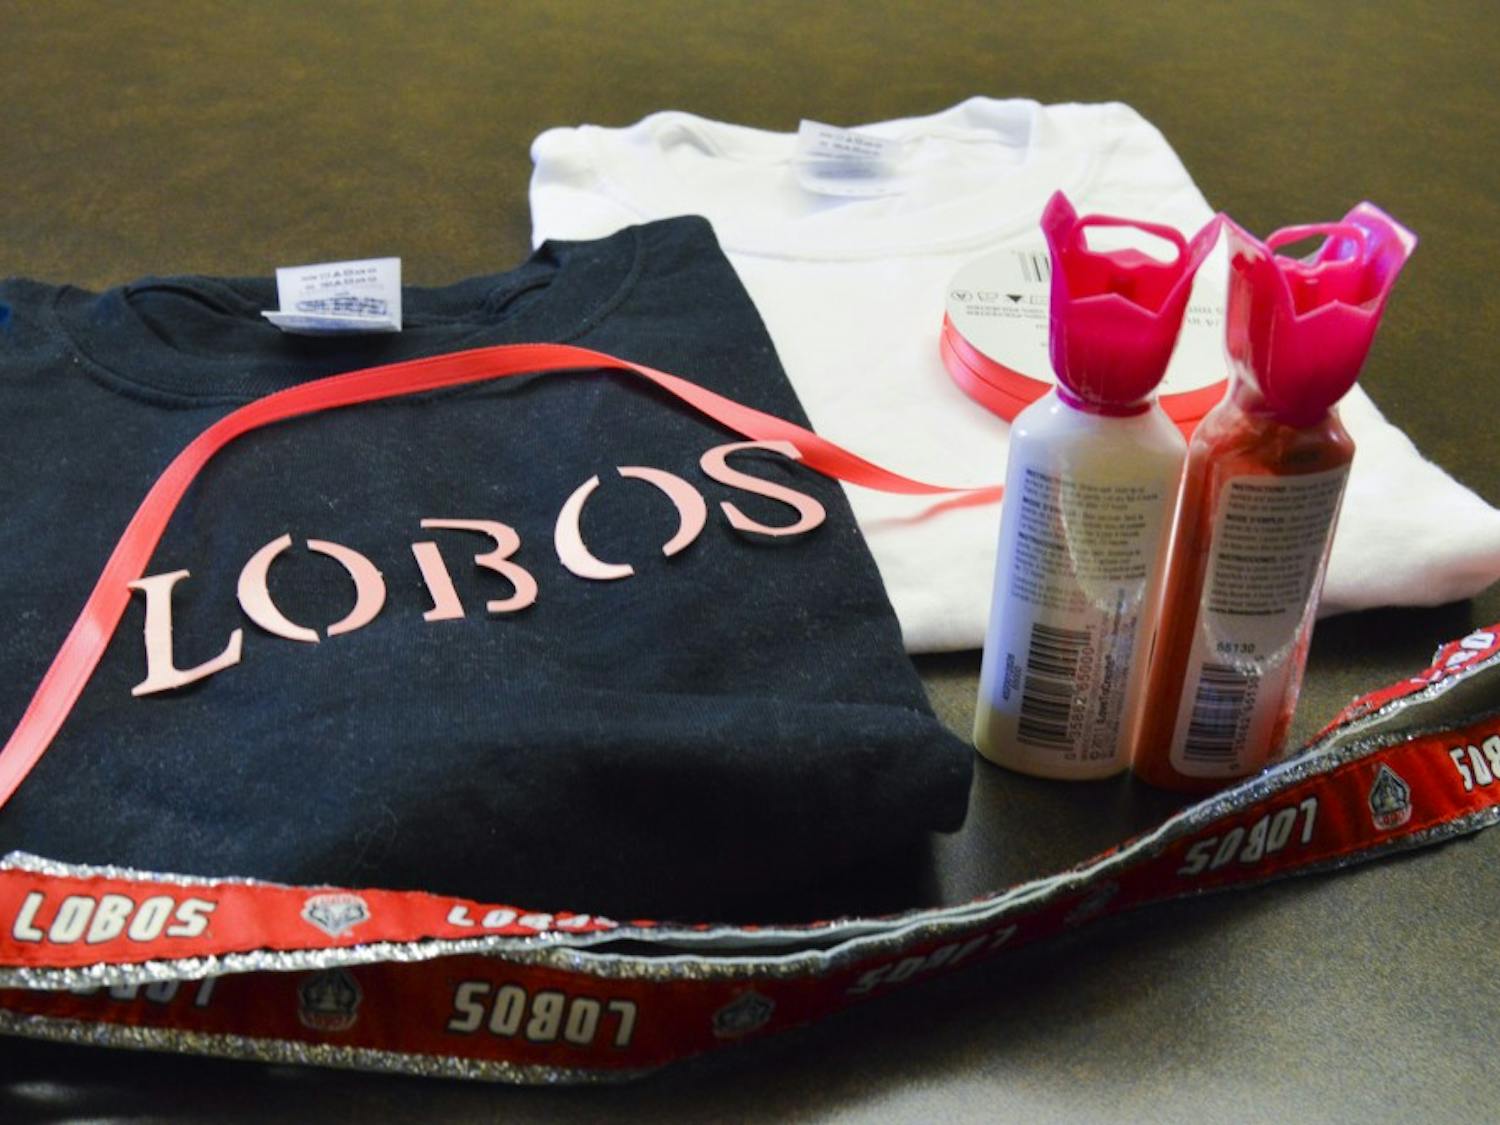 All the materials needed to create your own do it yourself Lobo attire.